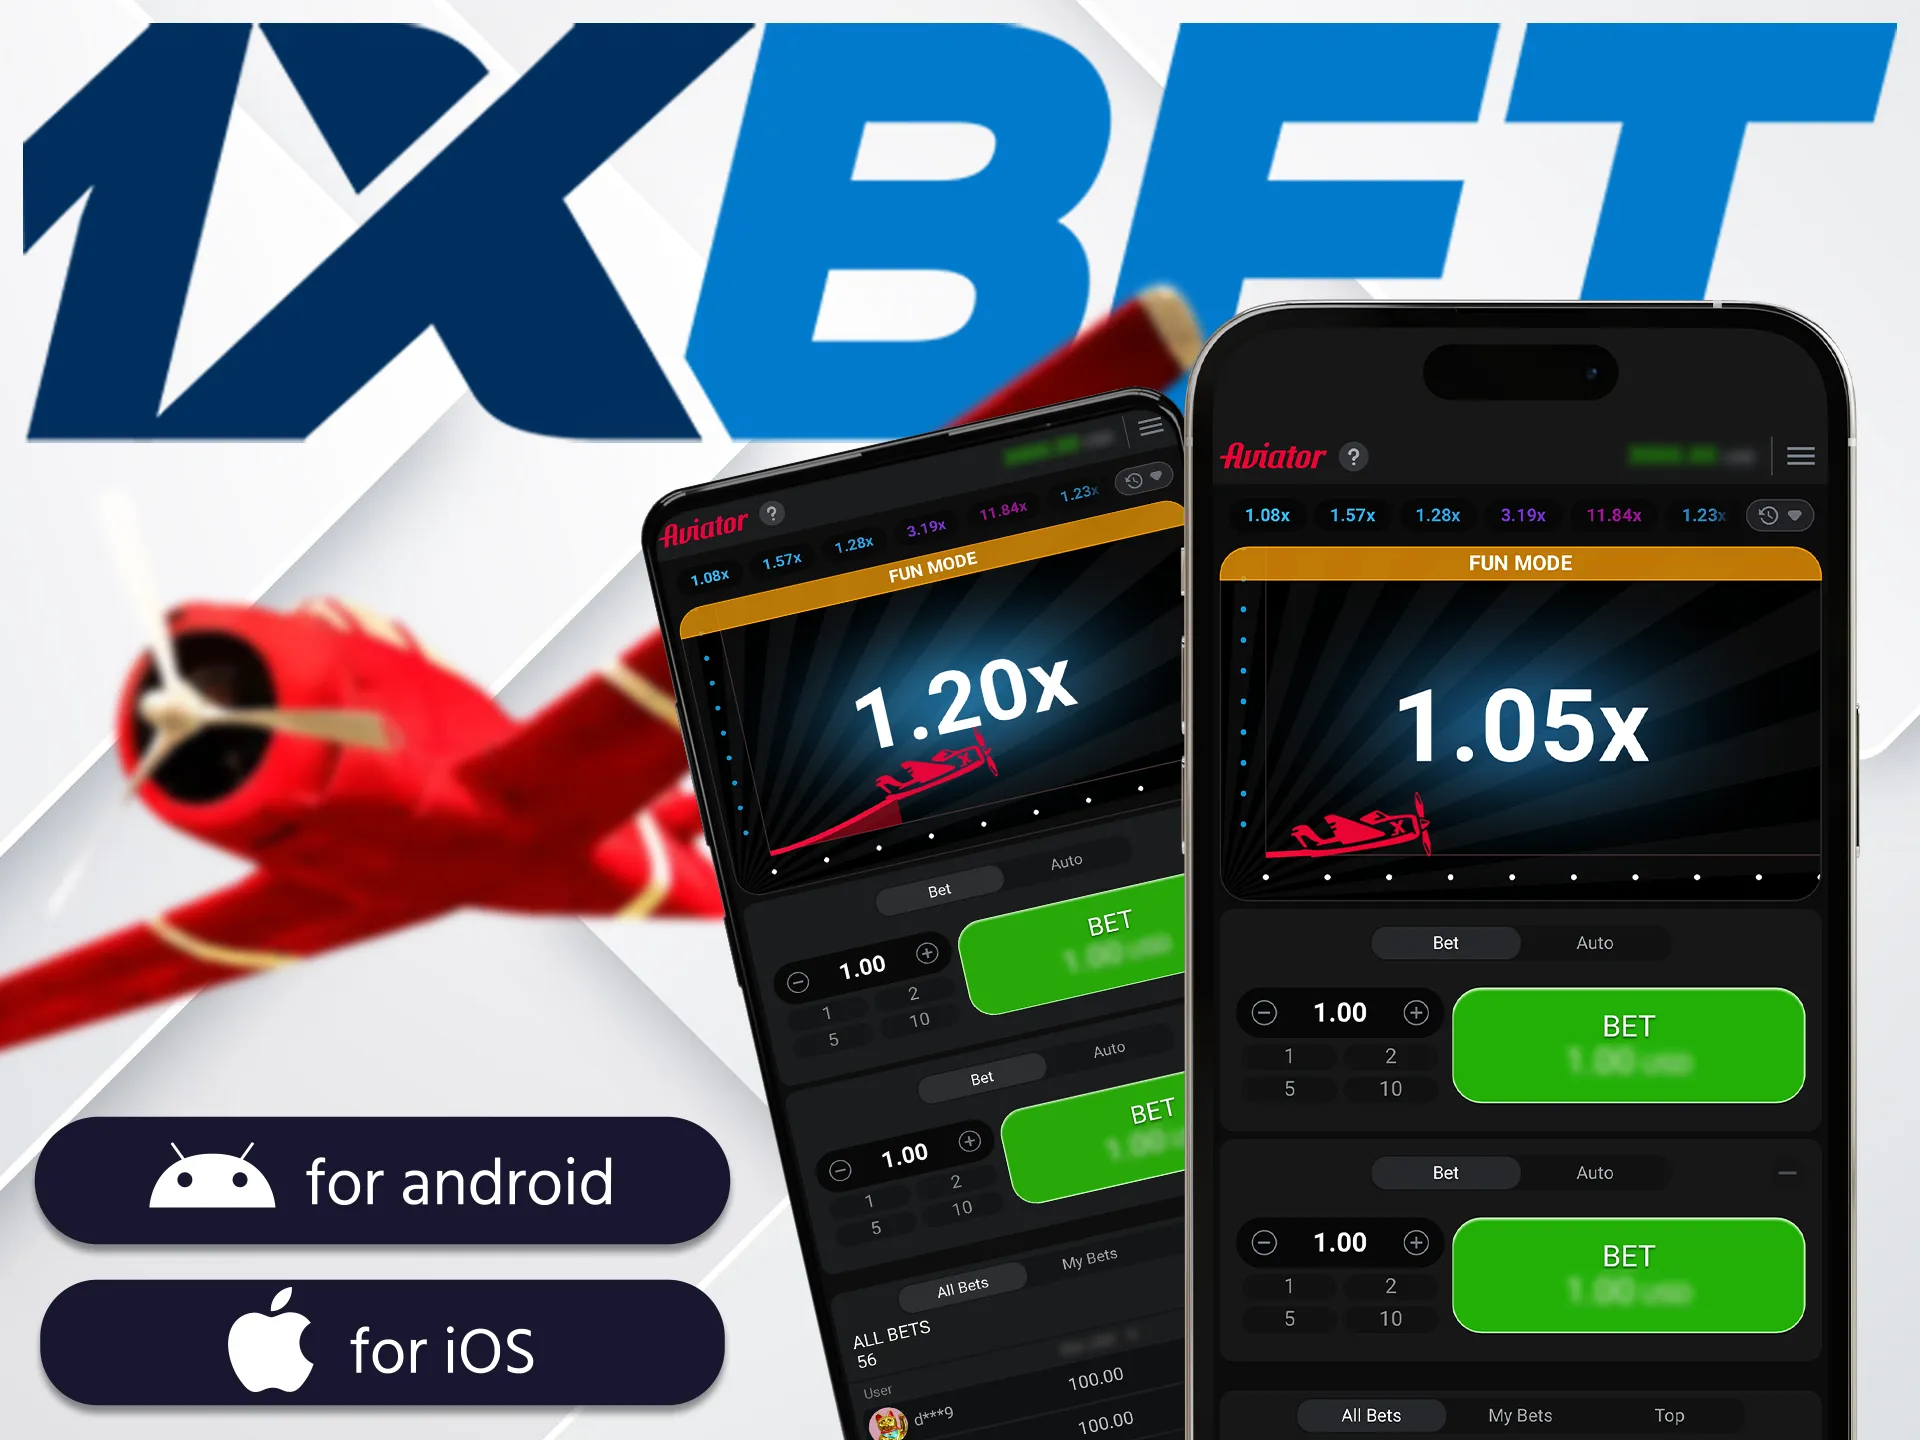 You can place bets and play casino games by downloading the 1xBet Aviator app for Android and iOS.